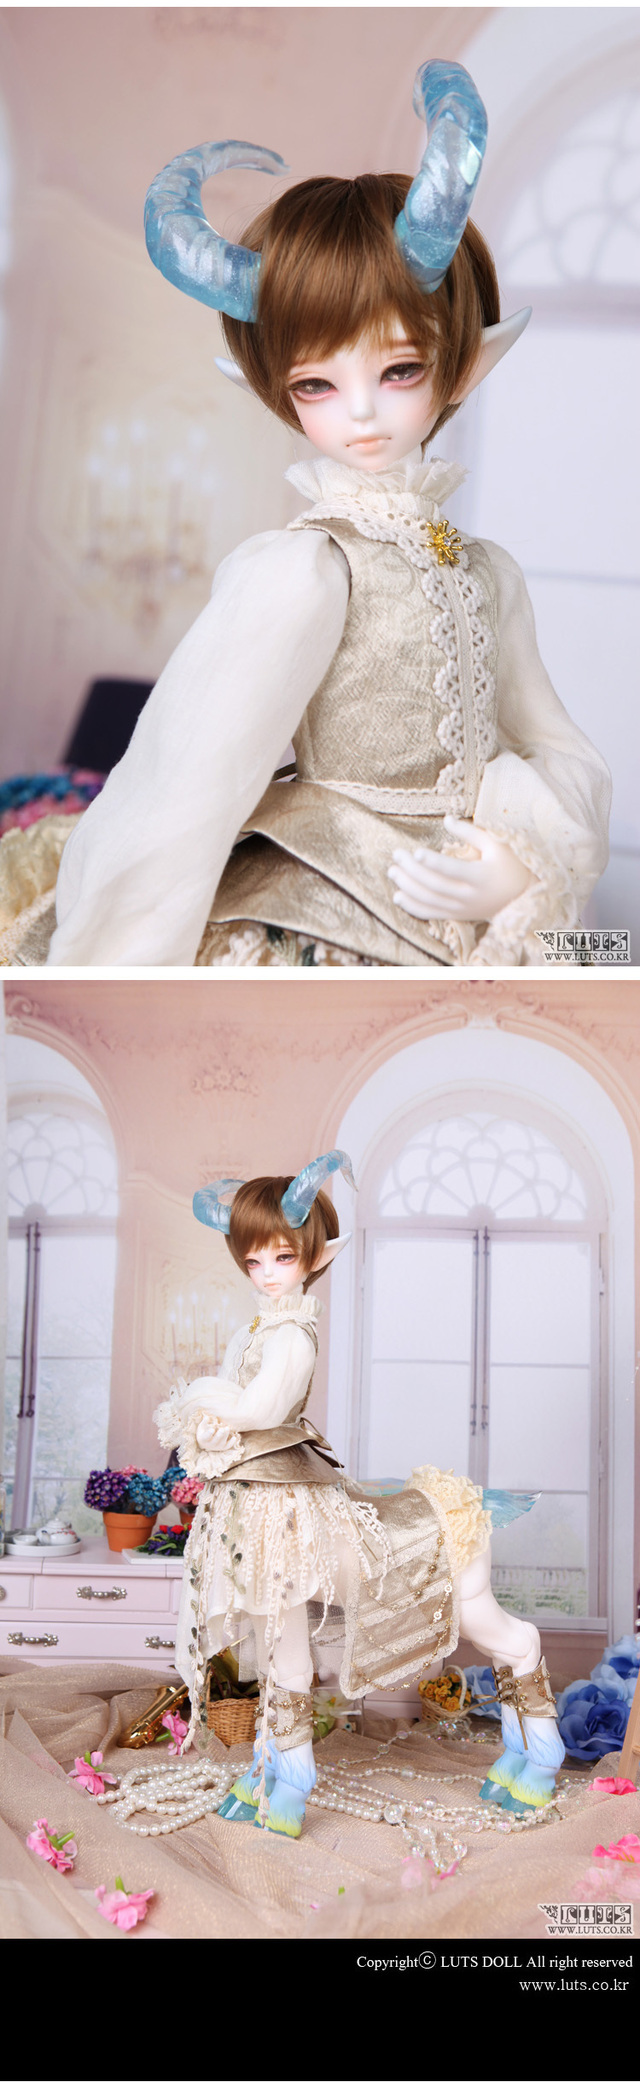 Kid Delf YUL ROMANCE SATYR ver. Limited - LUTS DOLL